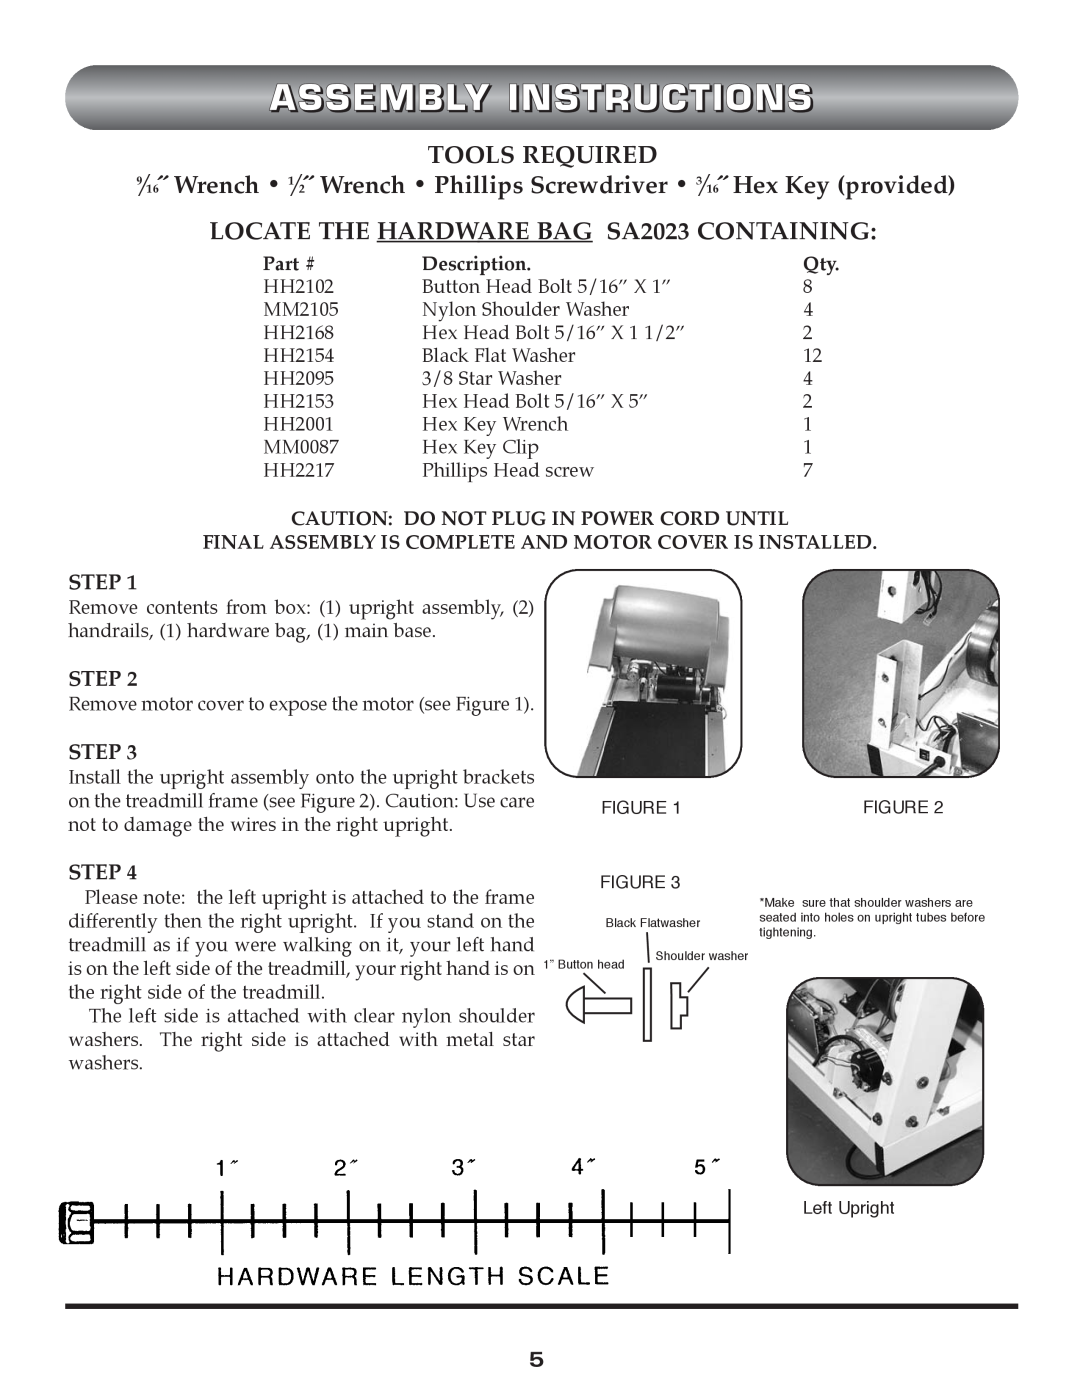 Trimline t523 manual Assembly Instructions, Tools Required, LOCATE THE HARDWARE BAG SA2023 CONTAINING, Step, Description 